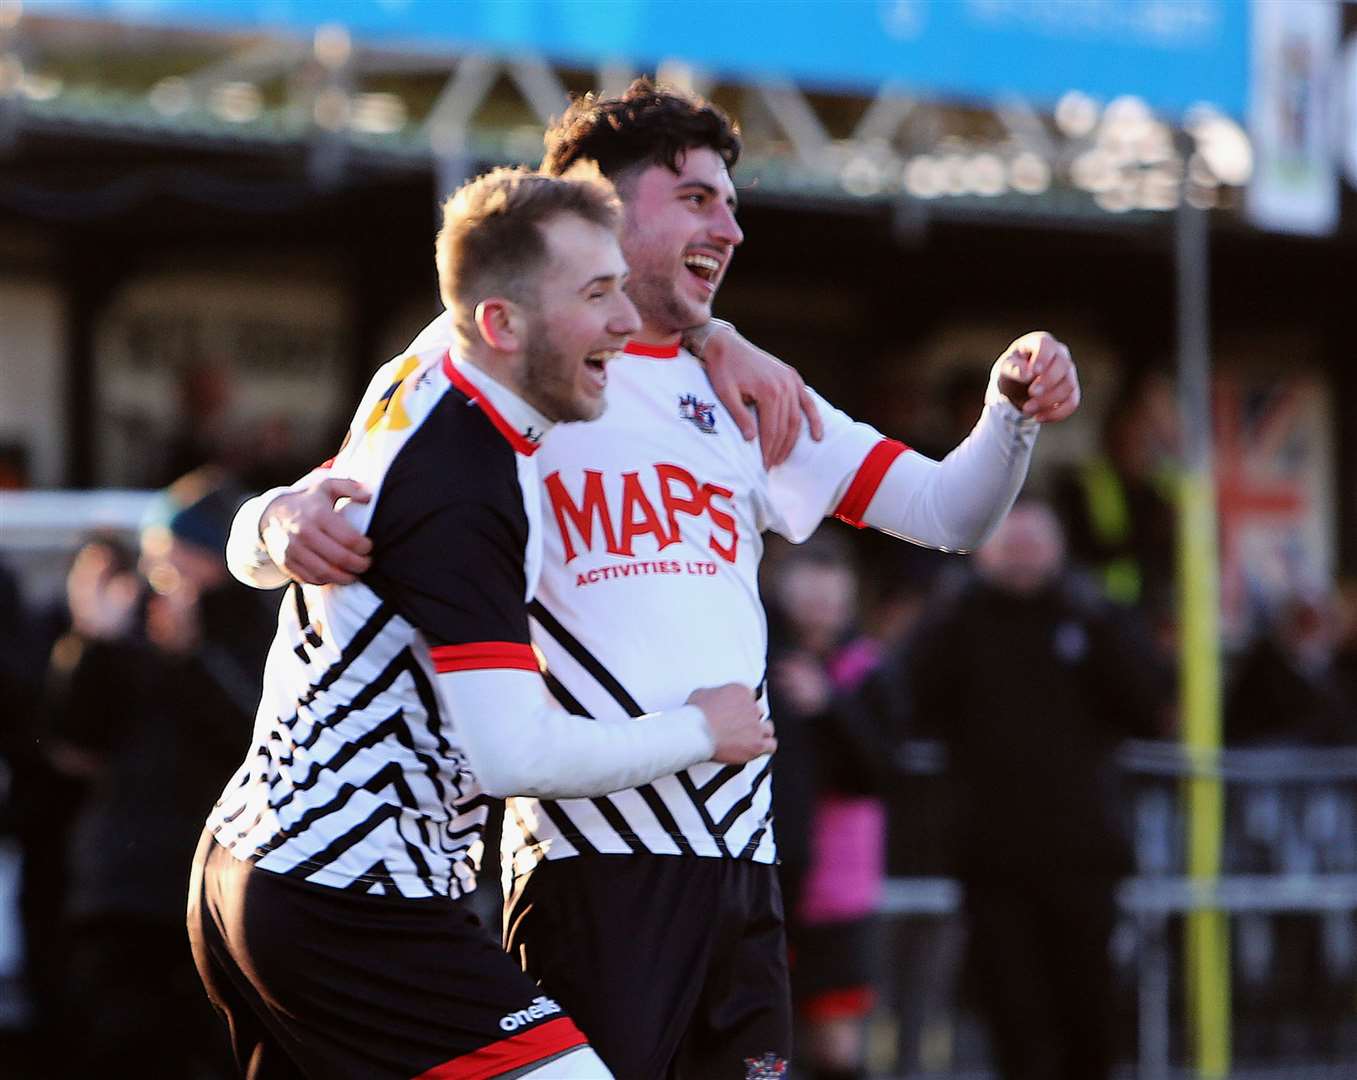 Jack Penny celebrates with a Deal team-mate having - quite incredibly - netted twice direct from corners in their 2-0 win over Bearsted. Picture: Paul Willmott